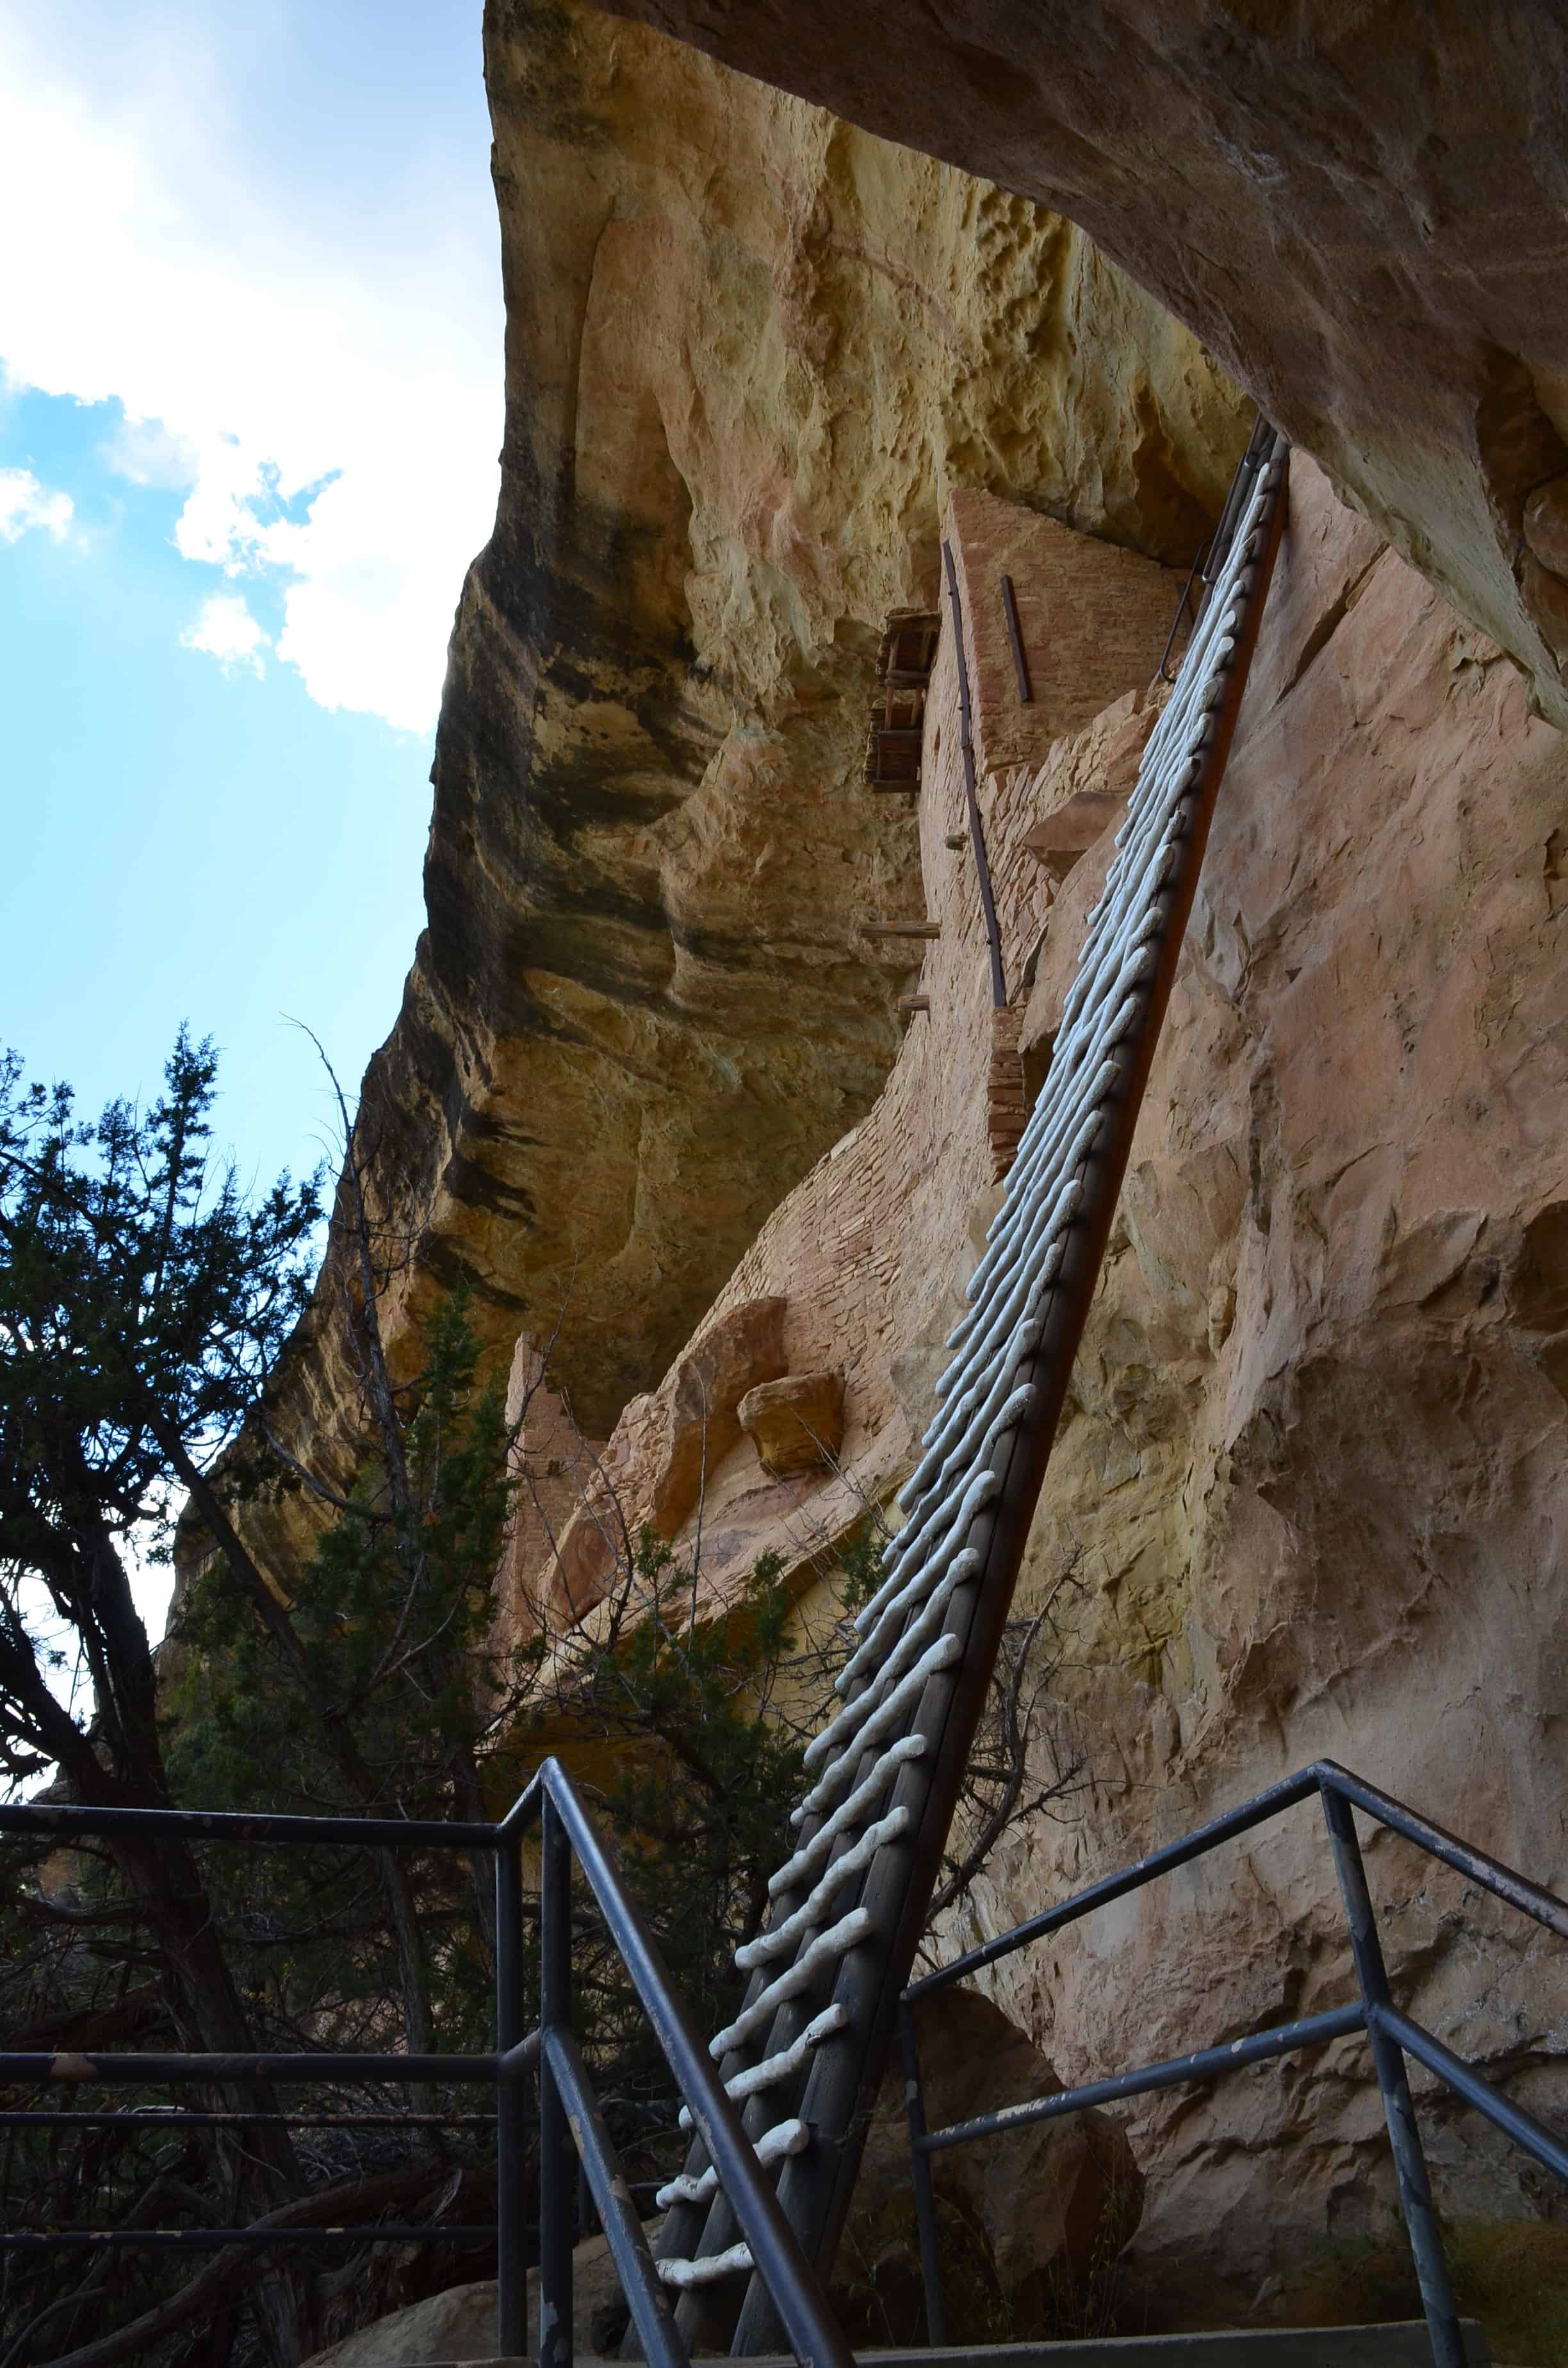 Ladder up to the site on the Balcony House tour at Mesa Verde National Park in Colorado